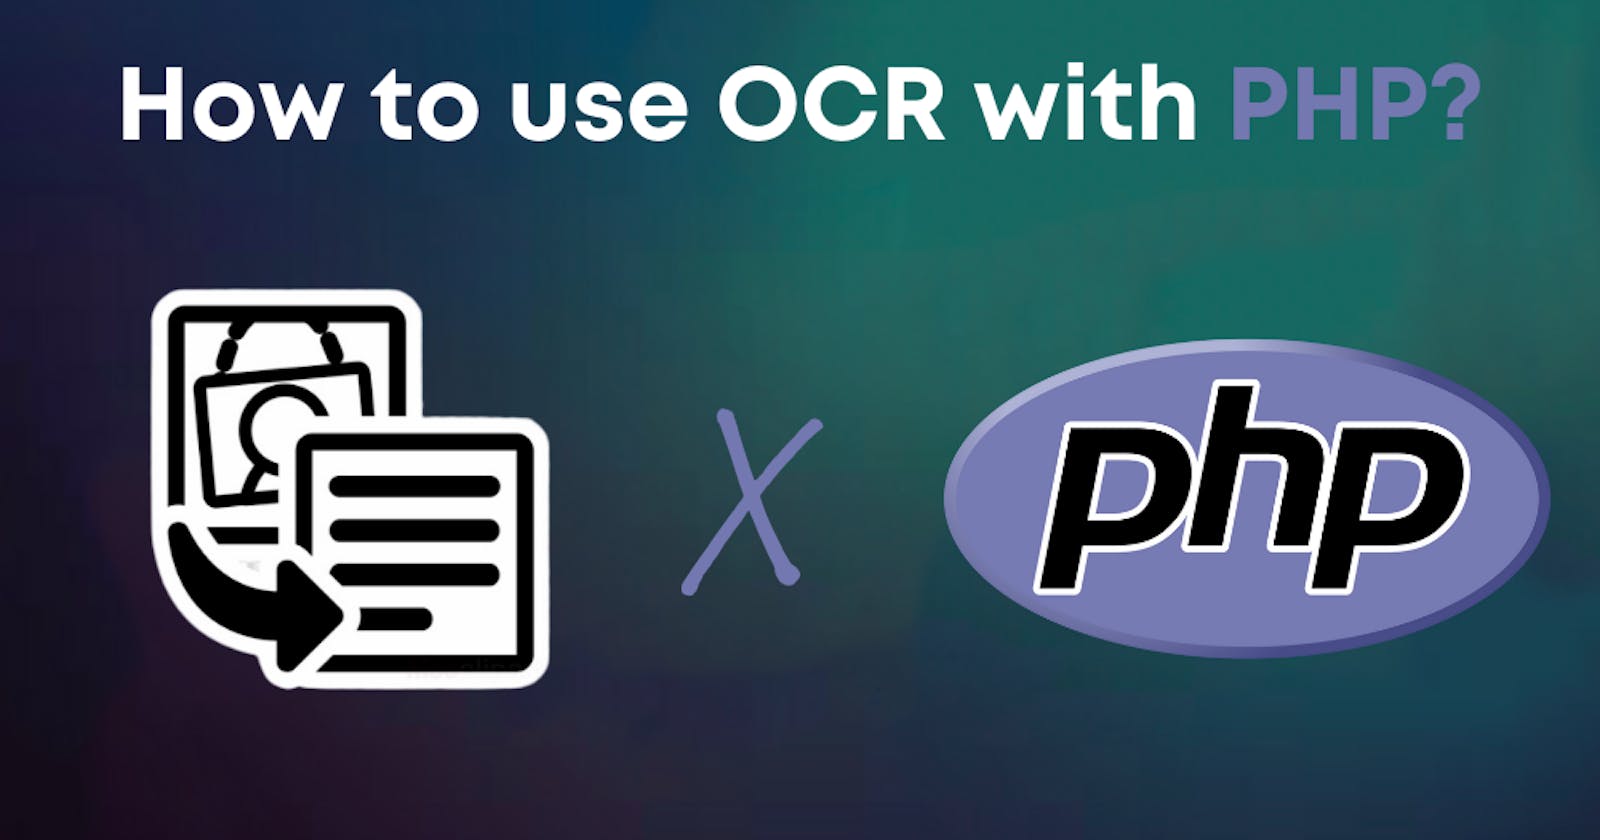 How to use OCR with PHP?